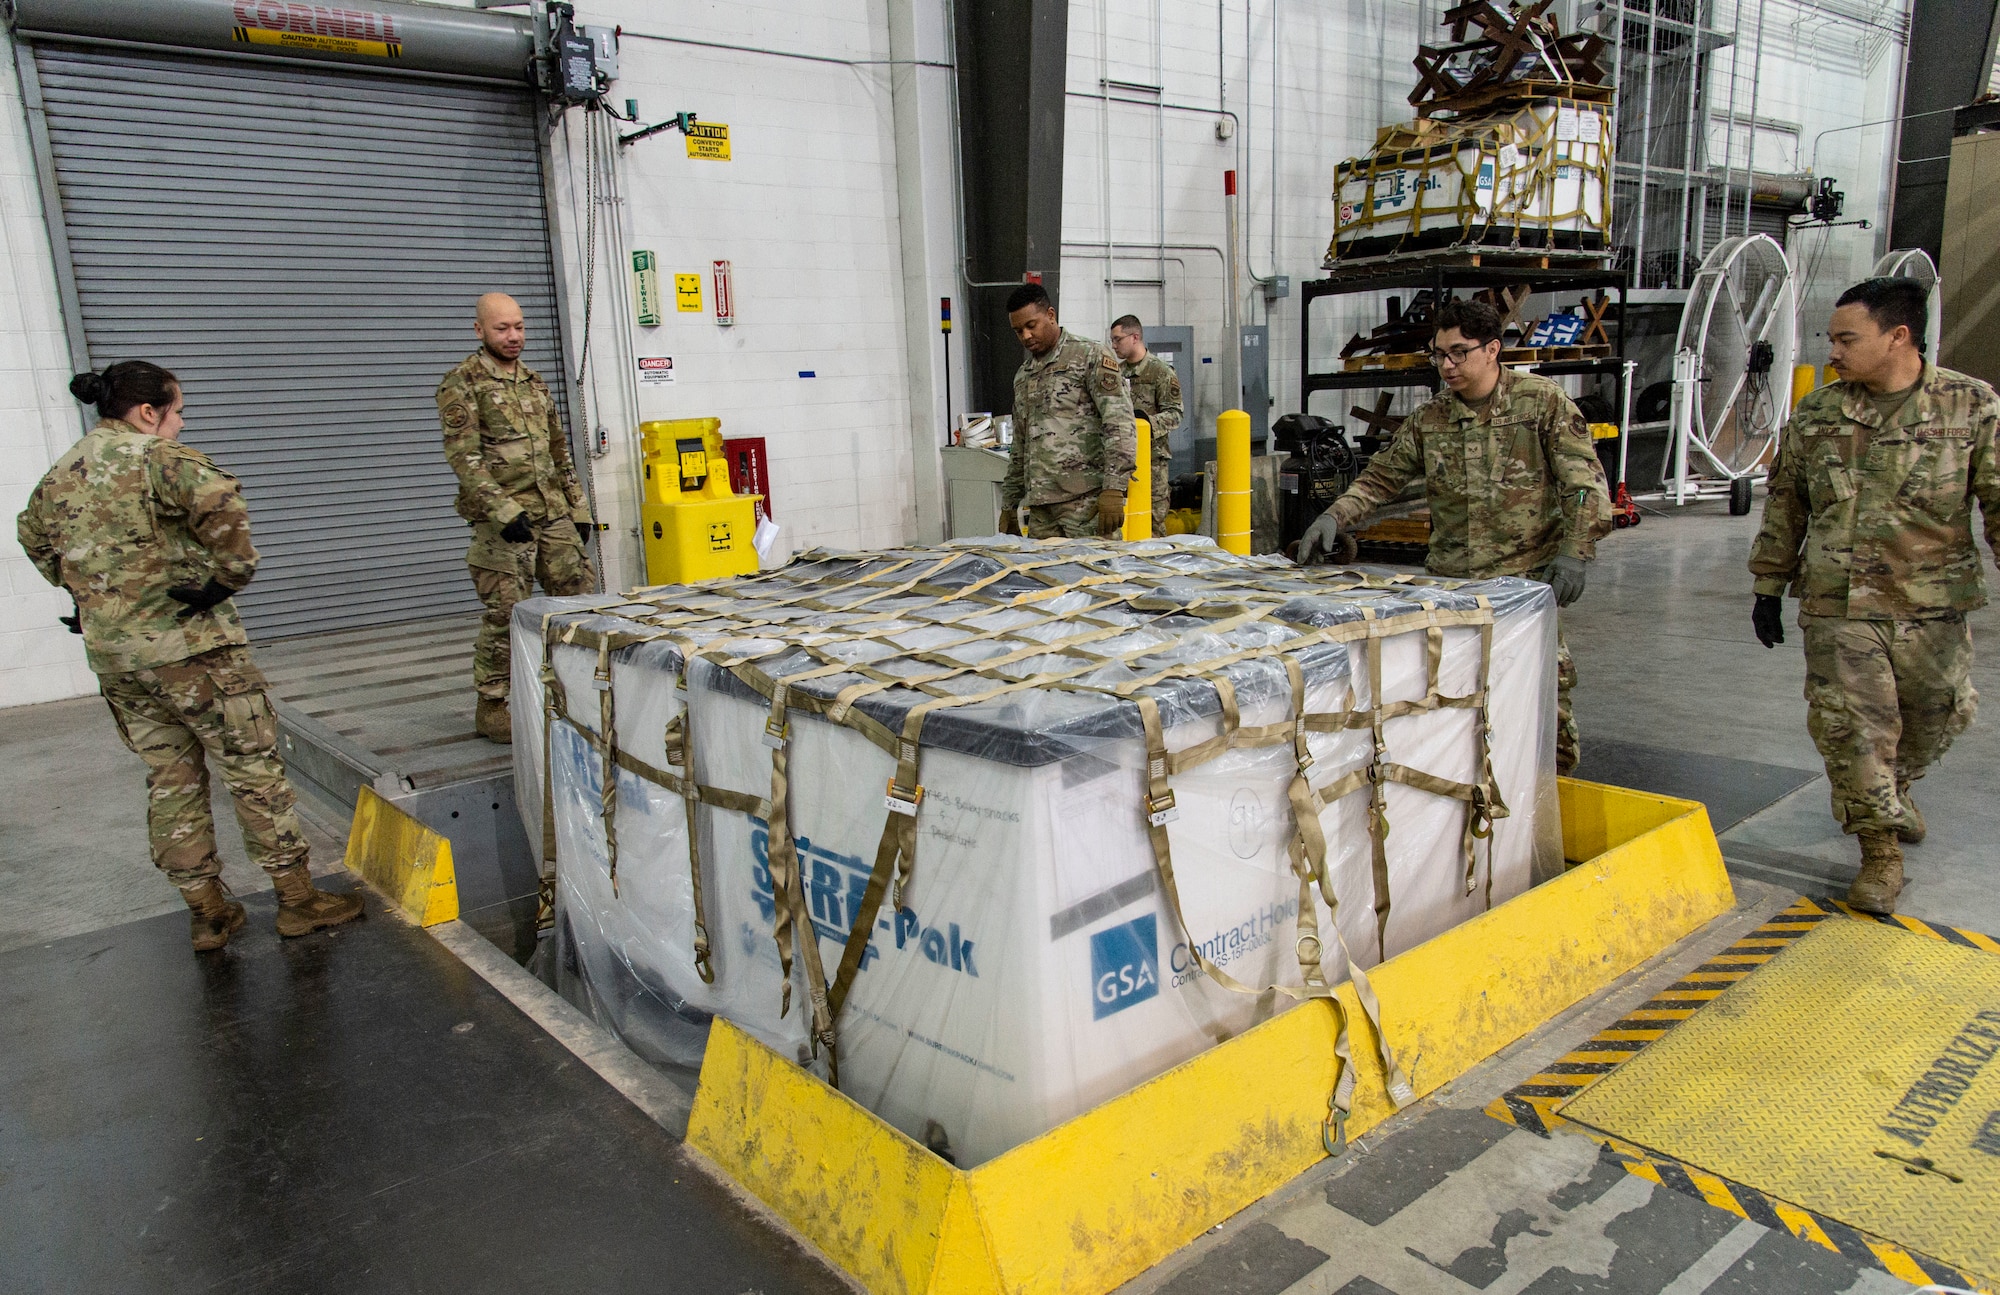 Students participating in a multi-capable Airman training class, place cargo netting on a pallet at Dover Air Force Base, Delaware, March 31, 2022. Students received basic pallet building instructions and were assisted by 436th Aerial Port Squadron personnel. (U.S. Air Force photo by Roland Balik)